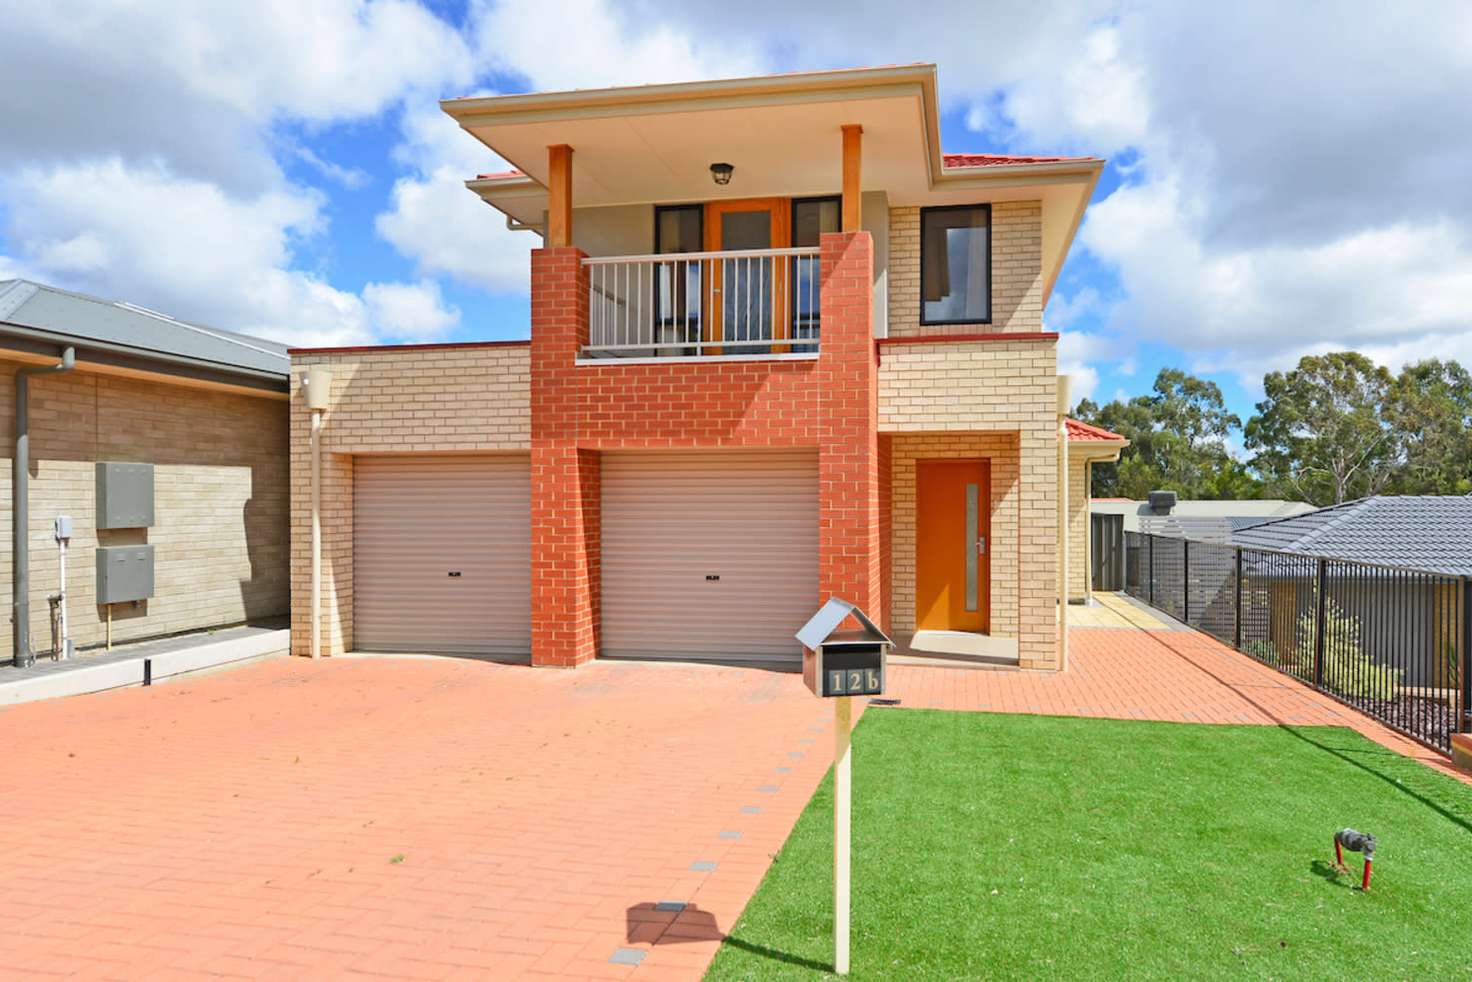 Main view of Homely house listing, 12b Coventry Drive, Athelstone SA 5076